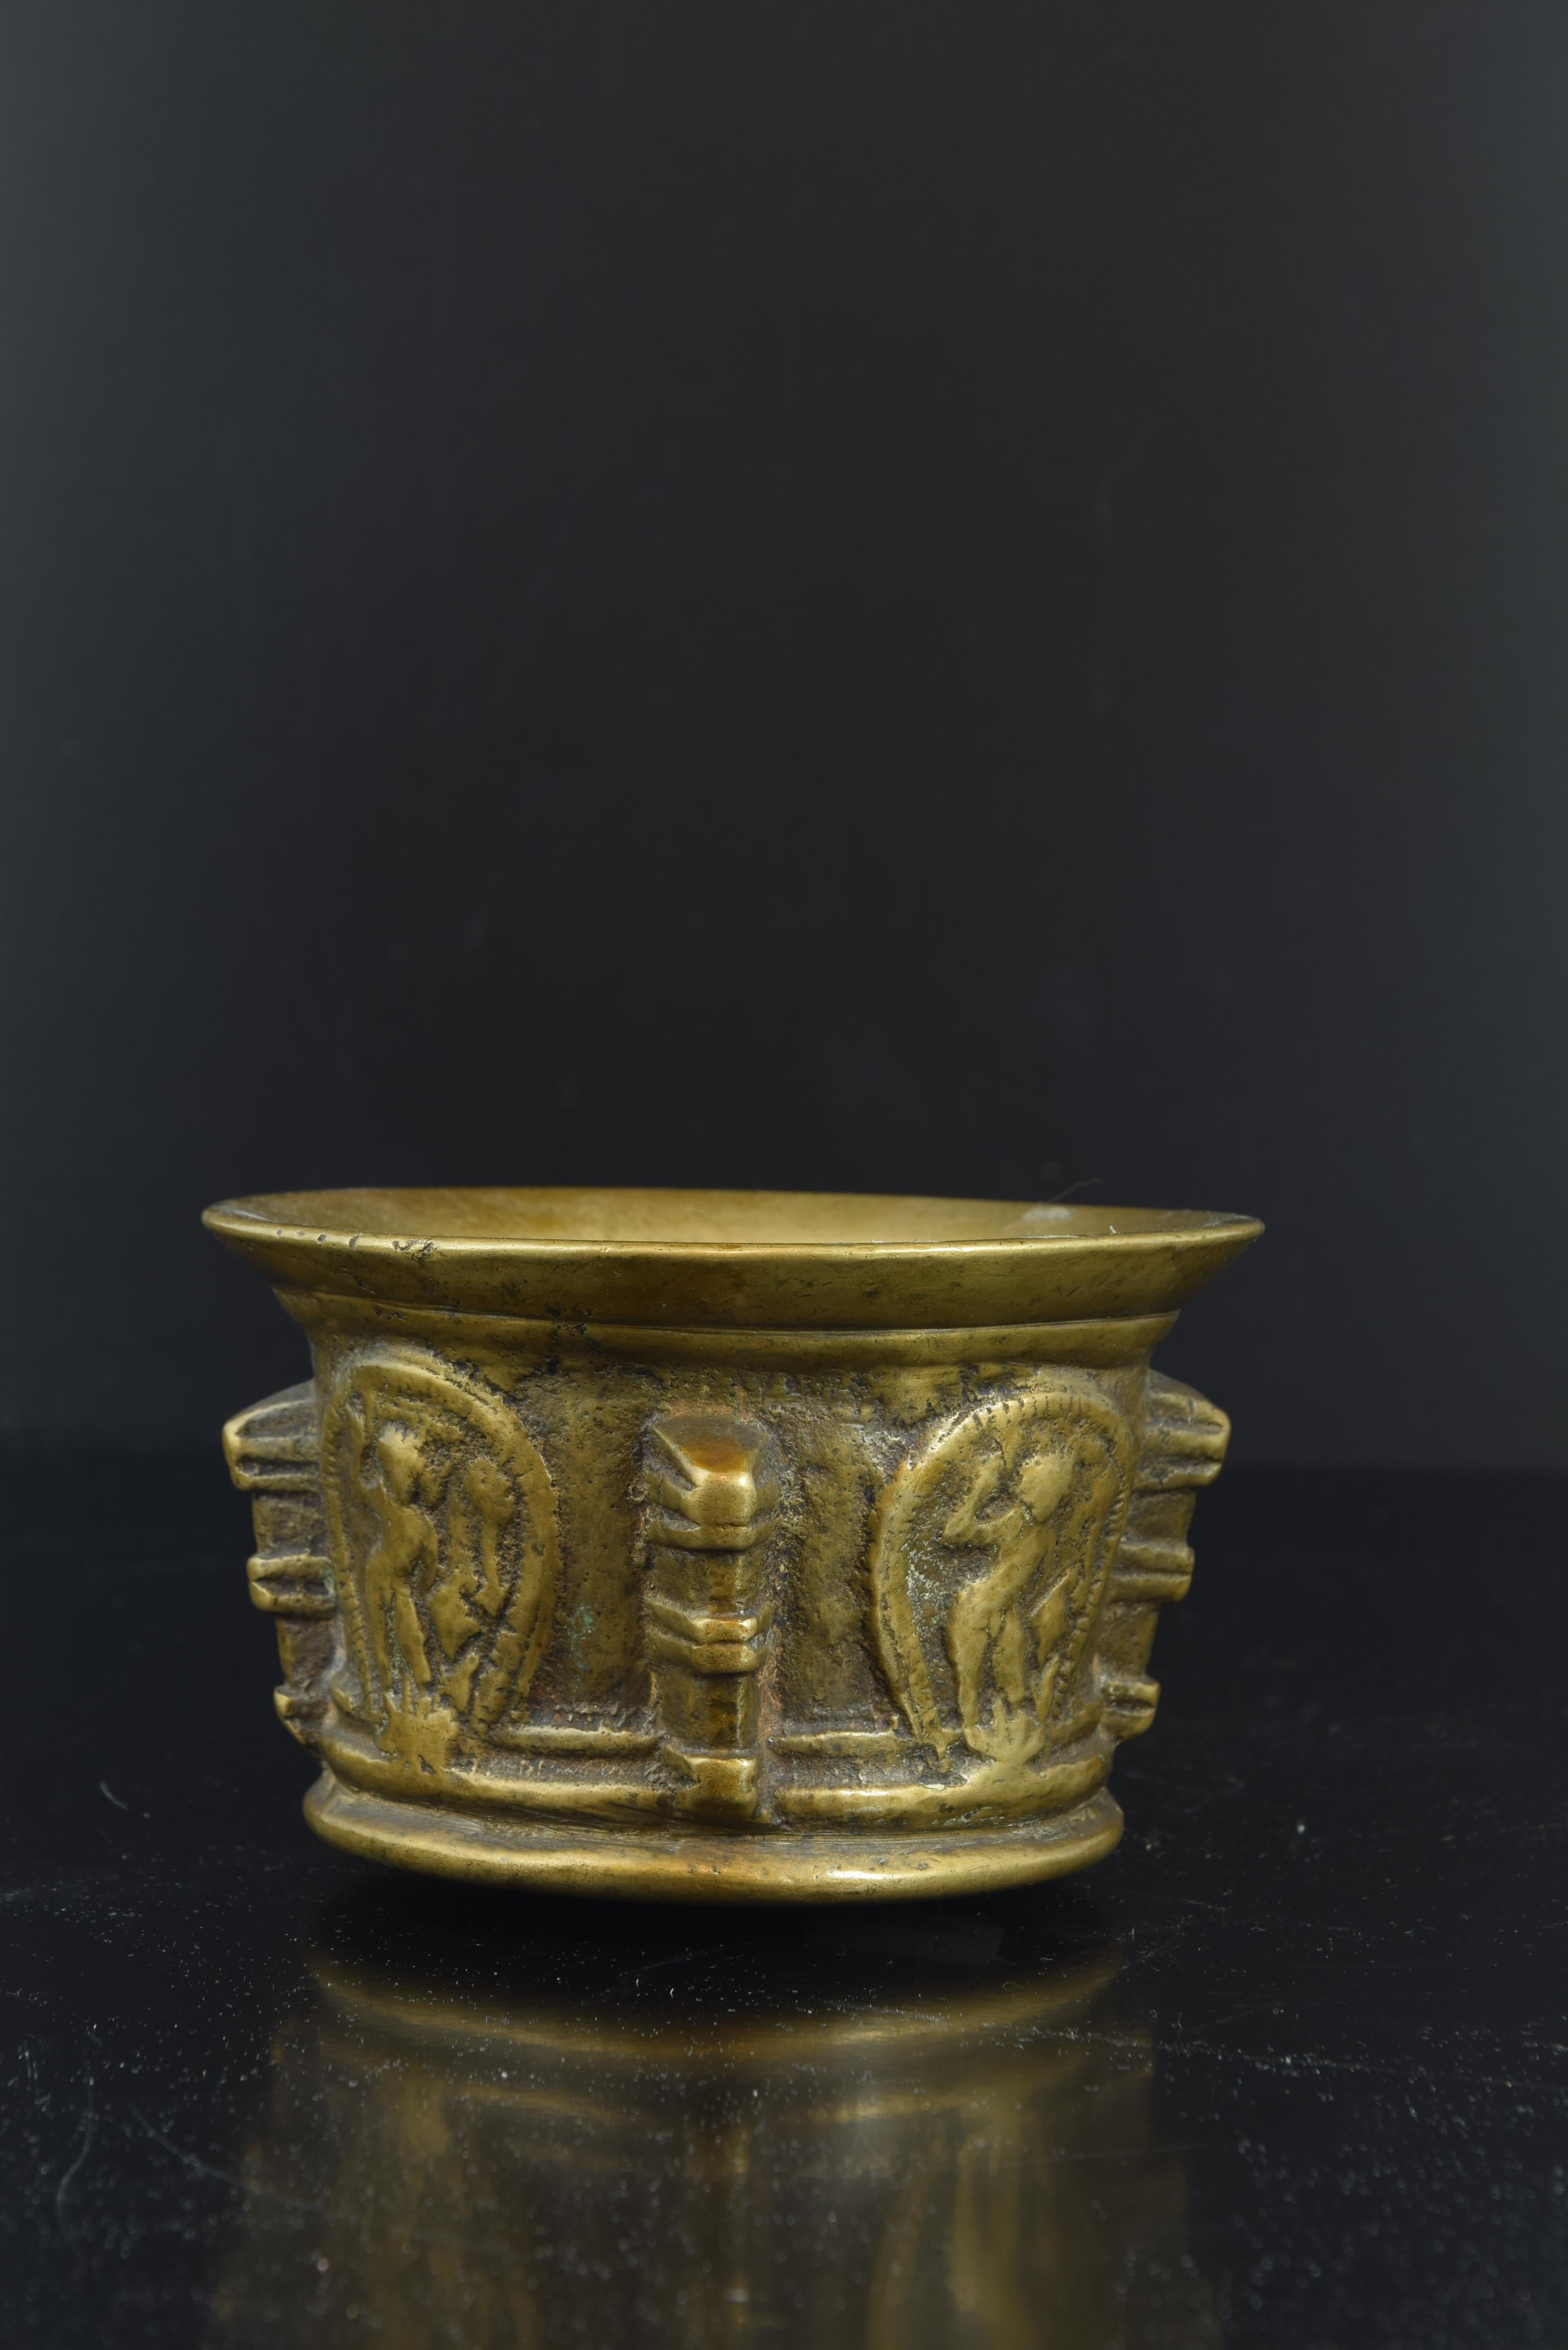 Mortar in bronze of the 17th century, decorated with ribs in the form of pillared pilasters and, in the planes, cartouches with the representation of Saint Michael the Archangel in relief.
Size: 7 x 7 x 12 cms.